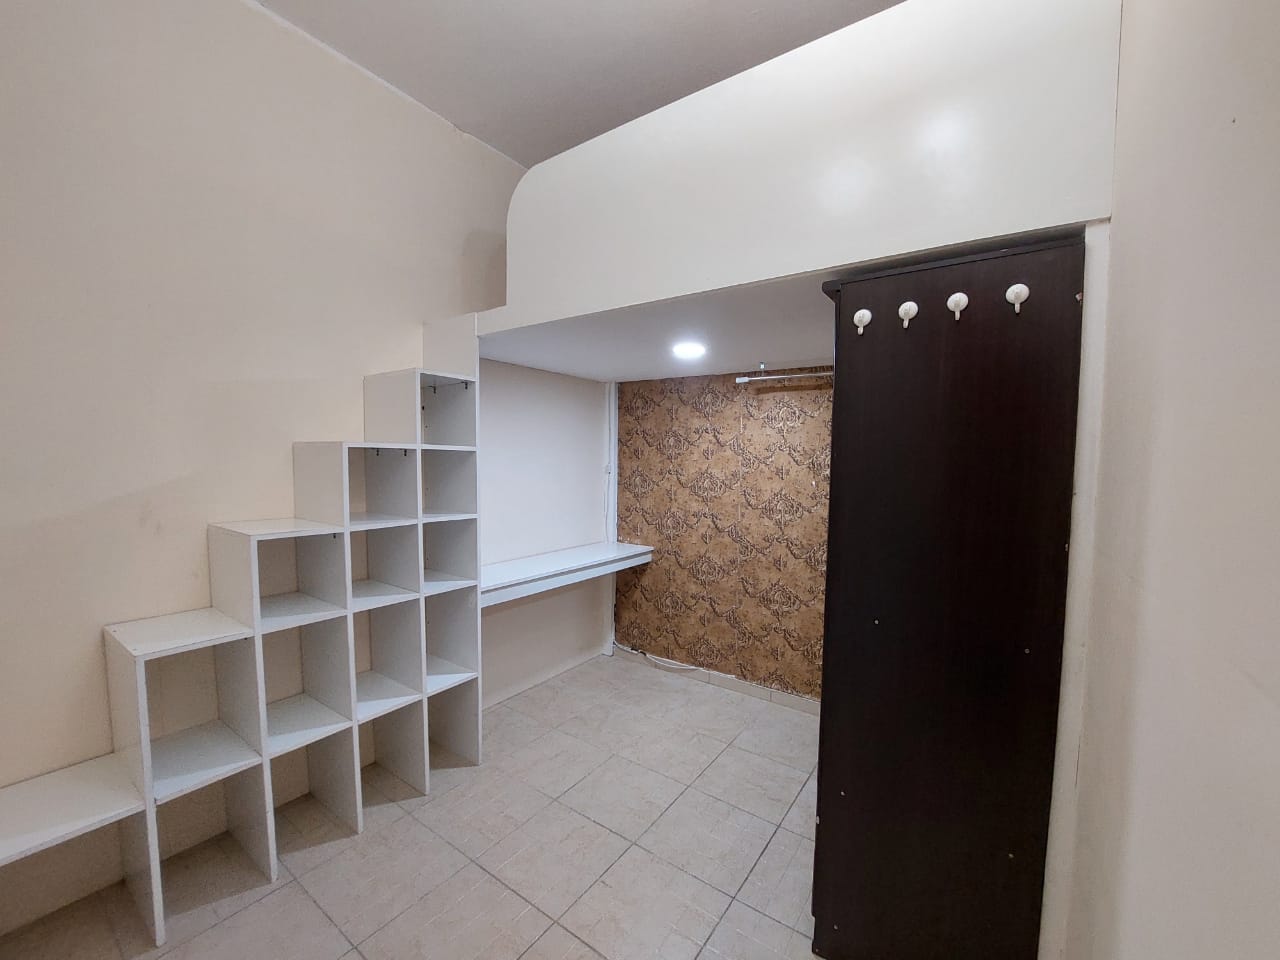 Loft Type Closed Partition Room with Sharing Bathroom